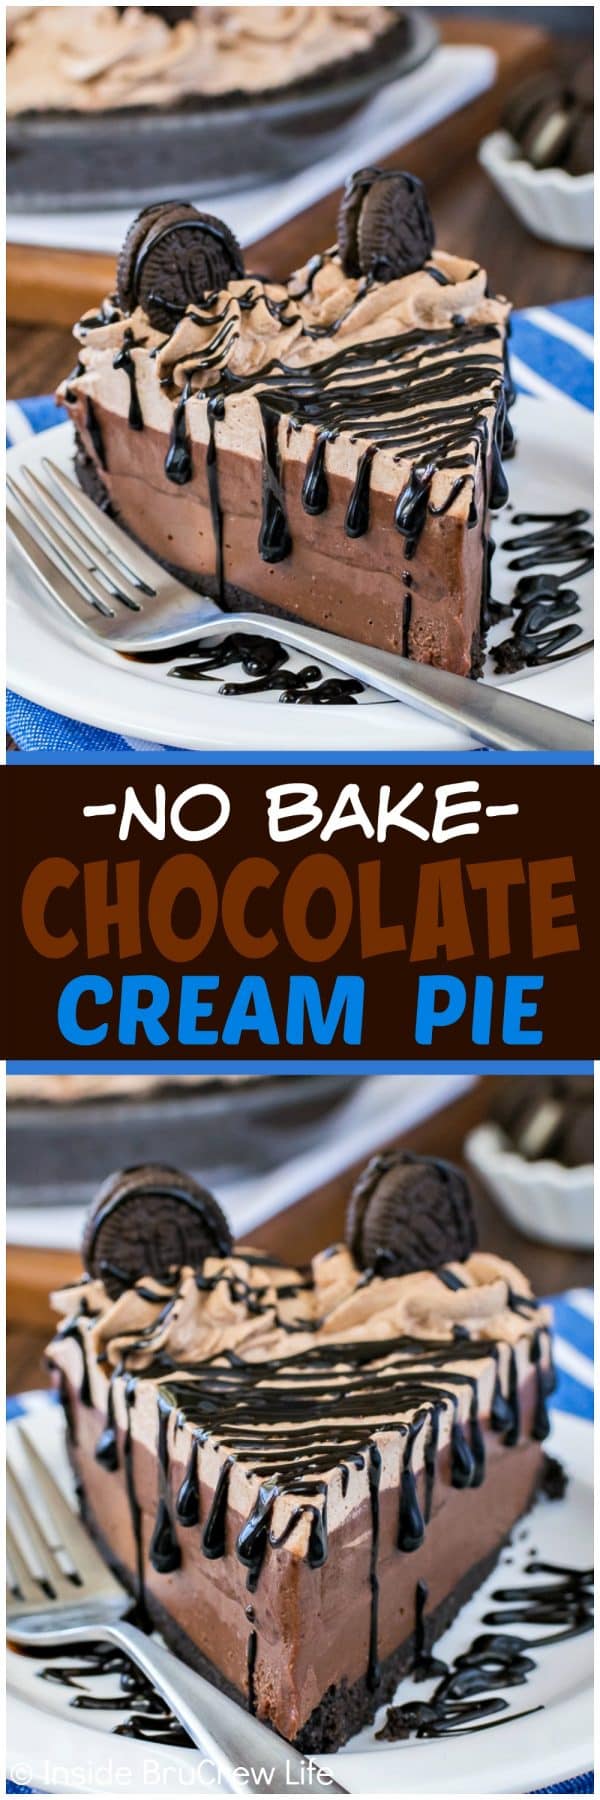 No Bake Chocolate Cream Pie - layers of chocolate whipped cream, pudding, and cheesecake make this the perfect pie for chocolate lovers! Easy no bake recipe for summer picnics!